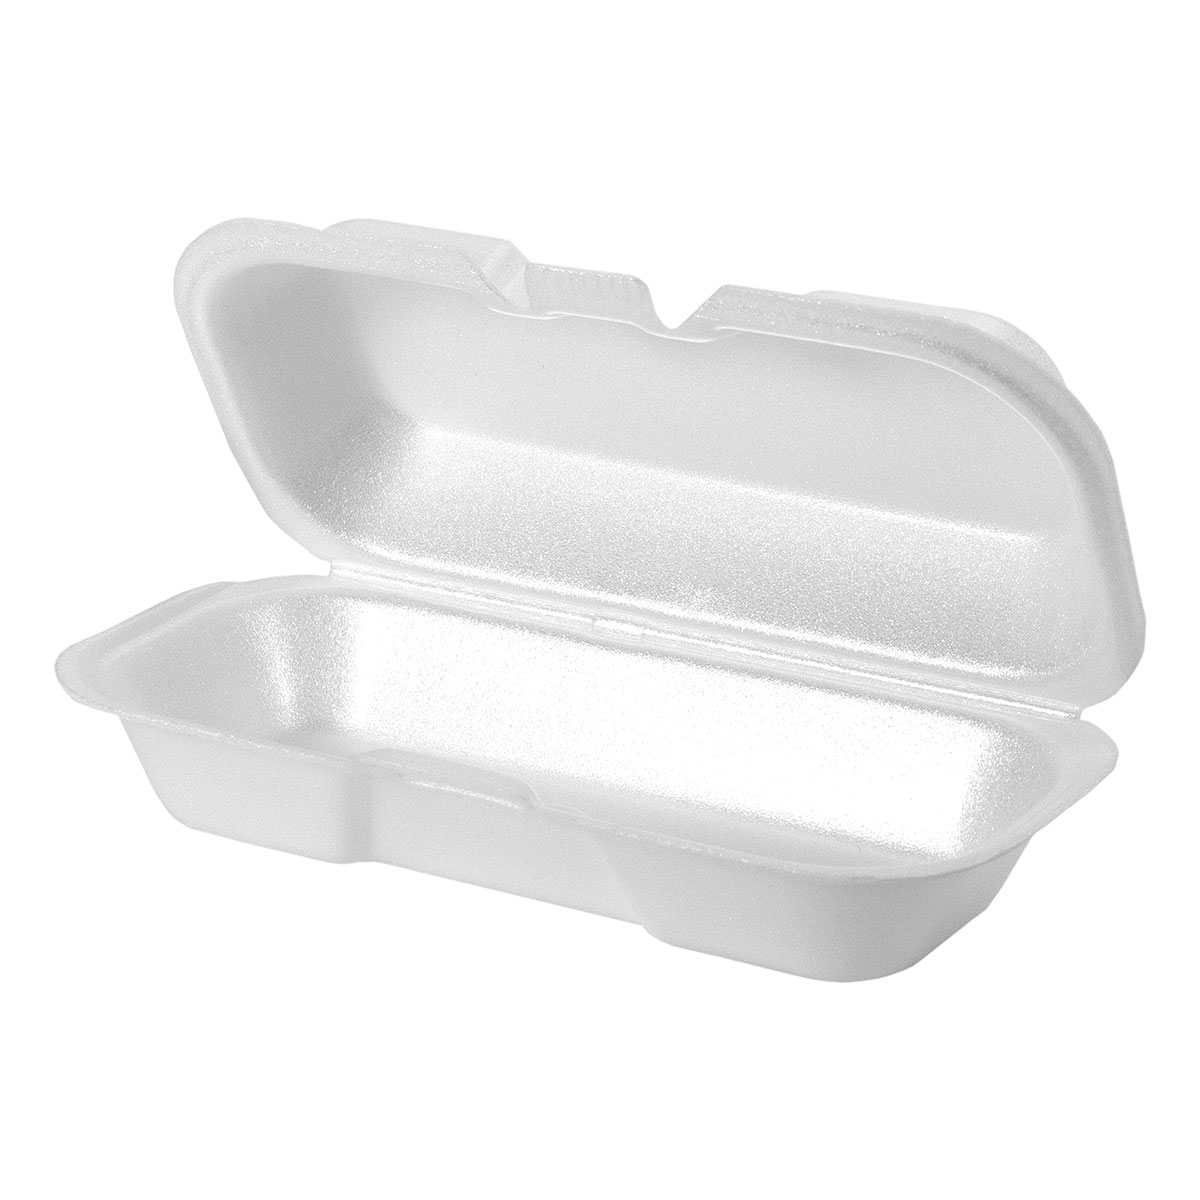 White 7"x 4" Hot Dog Hinged Rectangle Container